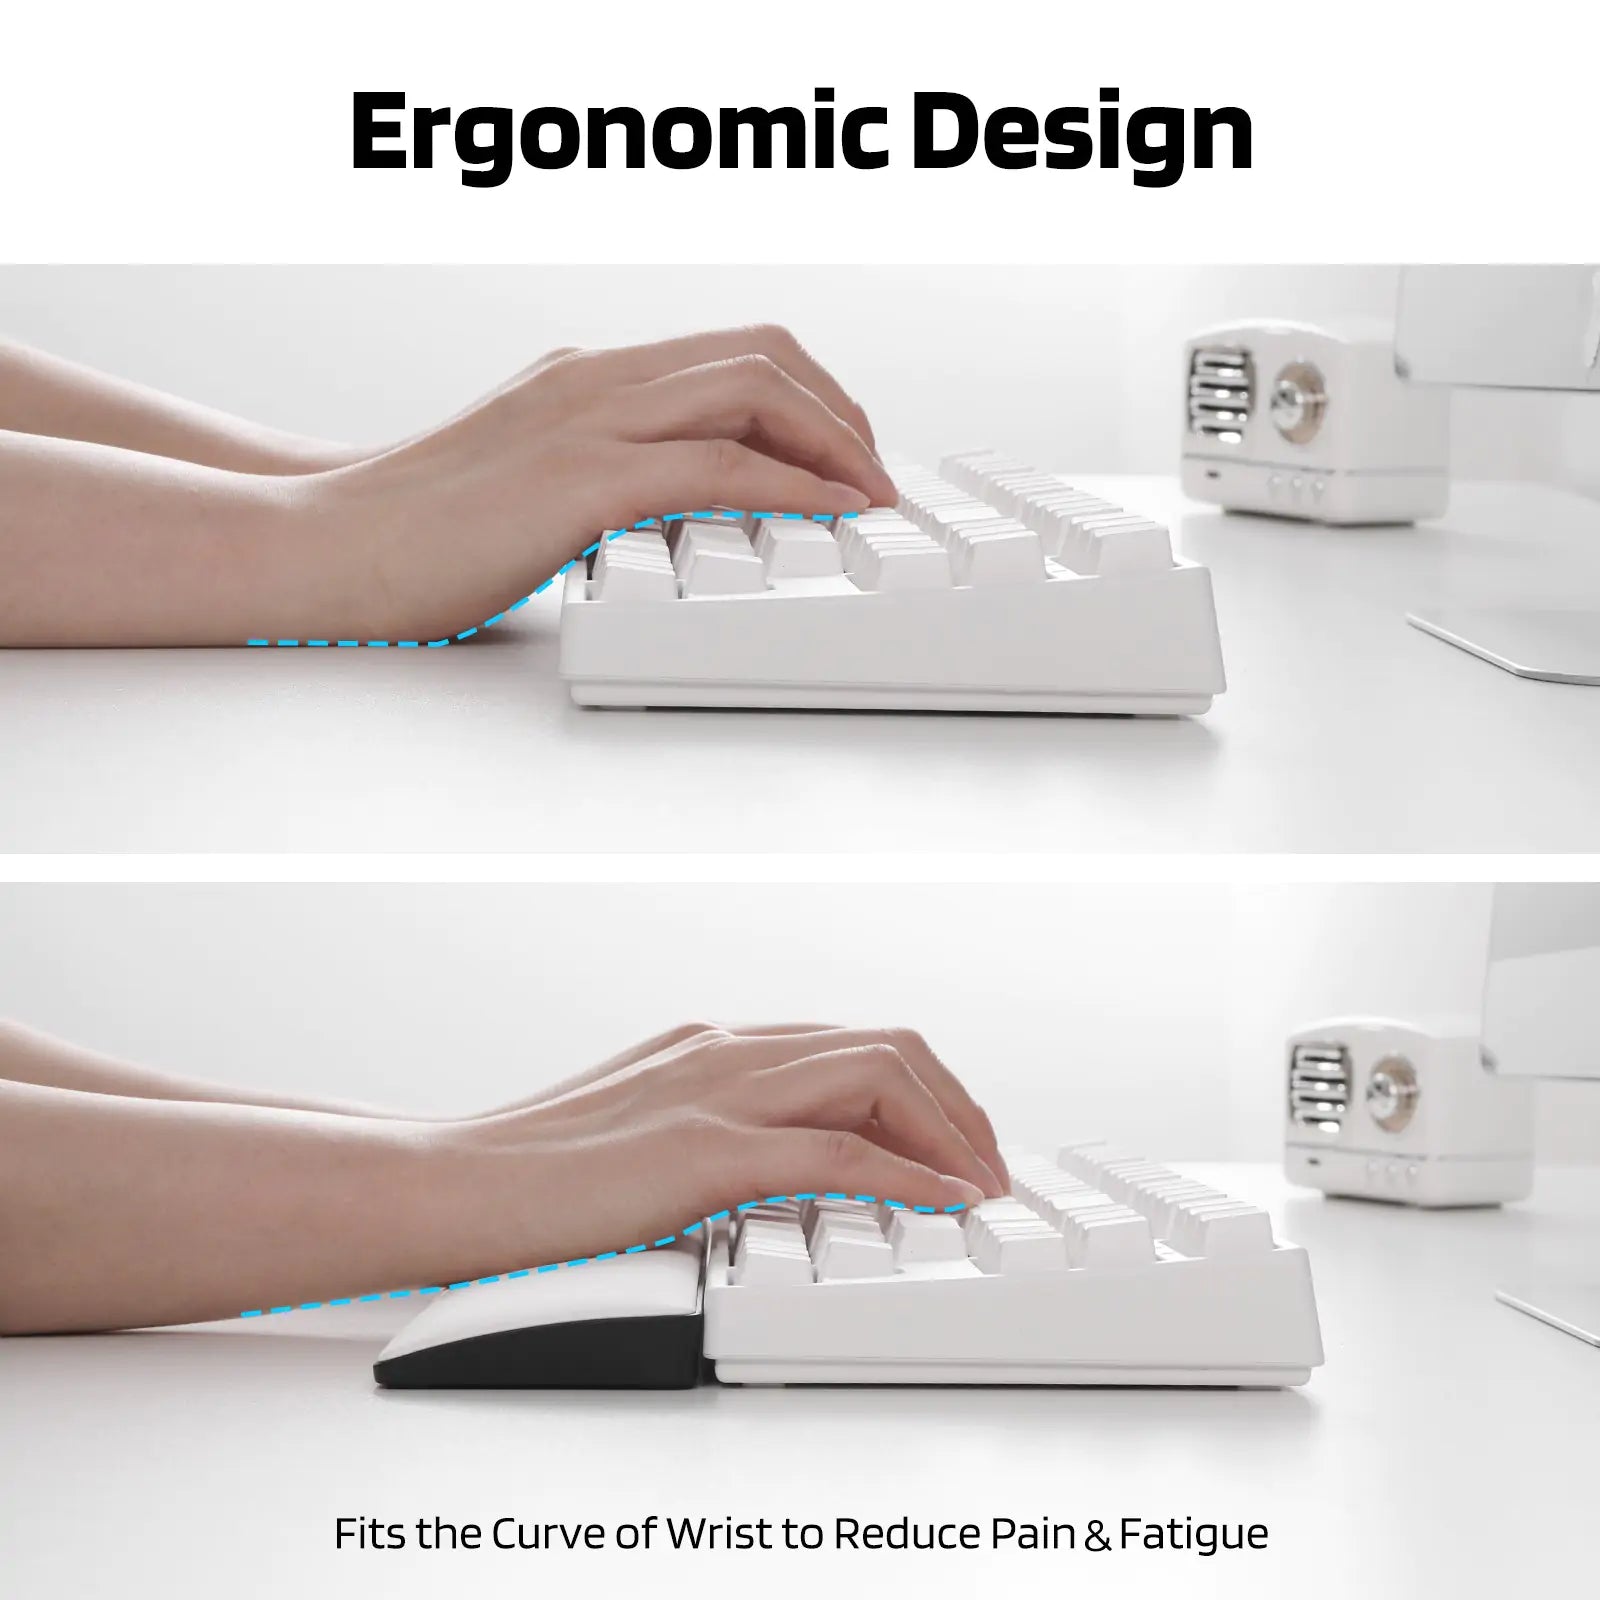 LTC Ergonomic Keyboard Wrist Rest, Cushion Support Pads for 104 Key Full Key Keyboard, for Office Gaming Computer PC Laptop Mac Typing